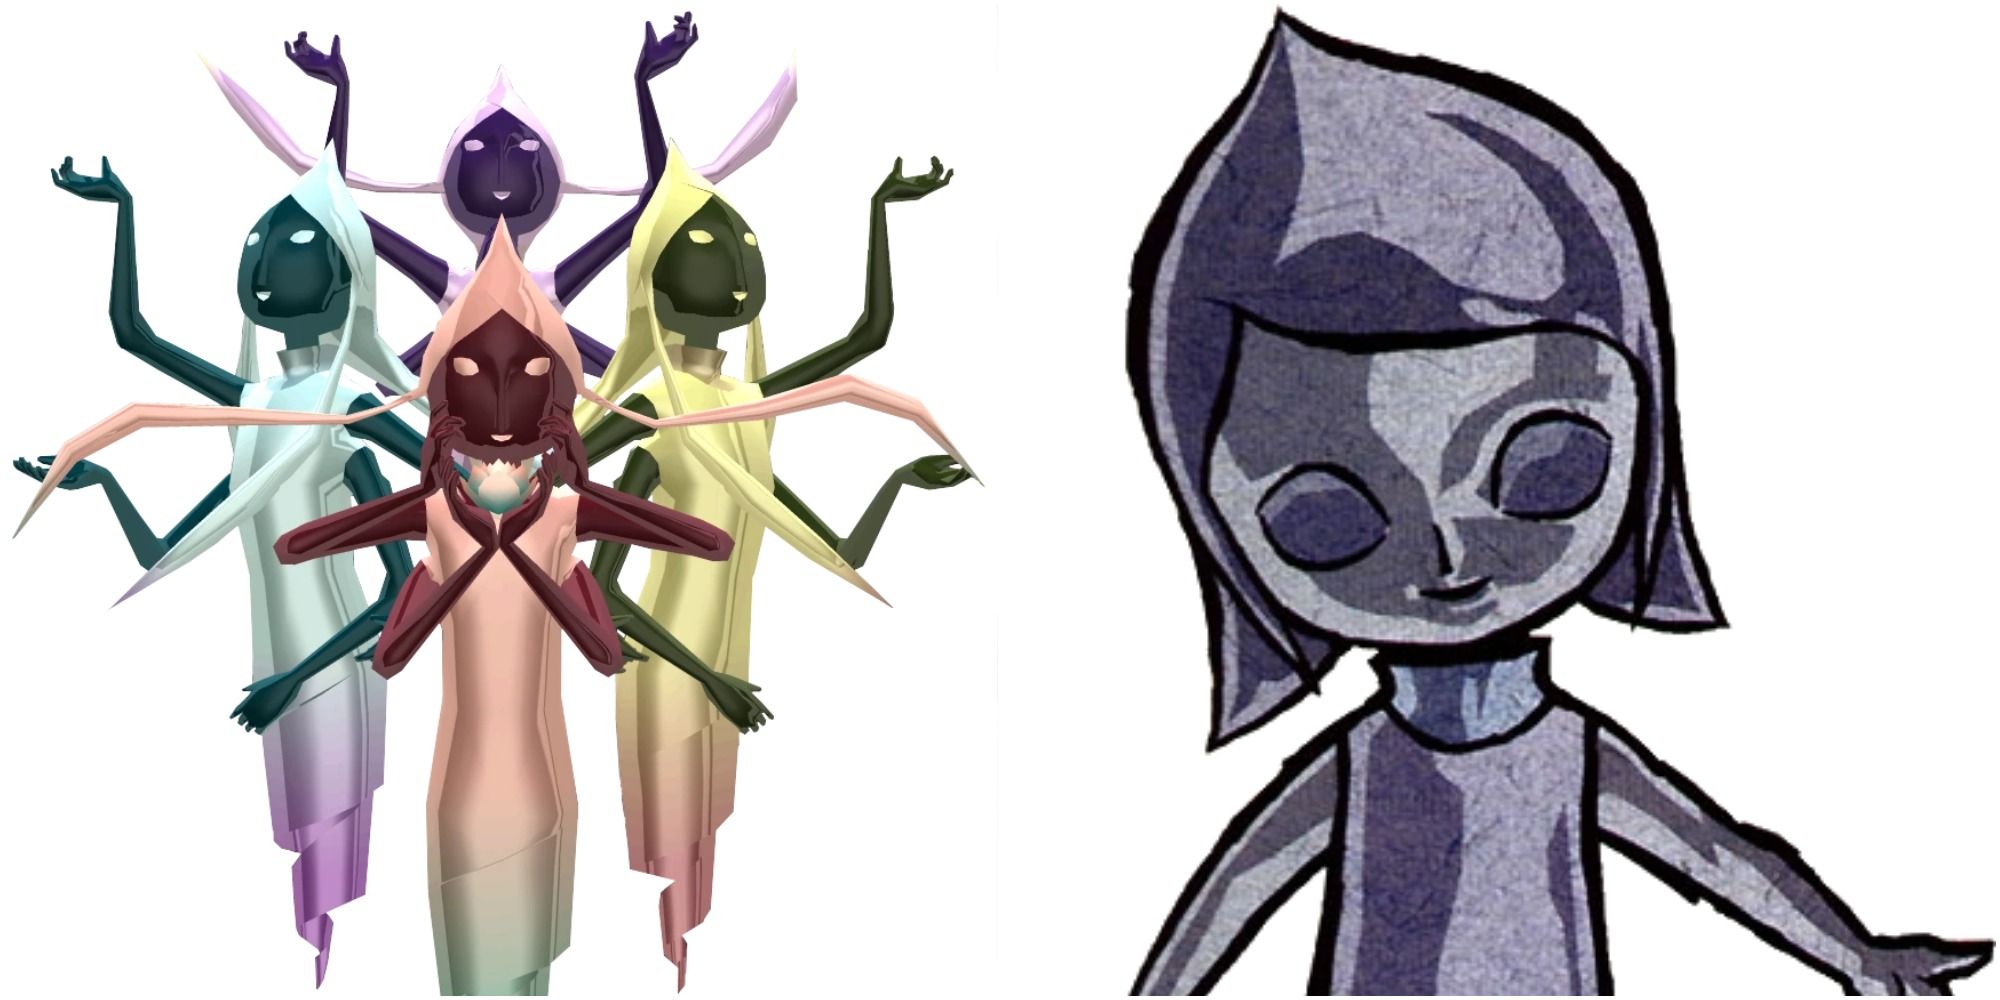 Split image screenshots of the Great Fairies and the Queen of Fairies from The Wind Waker.